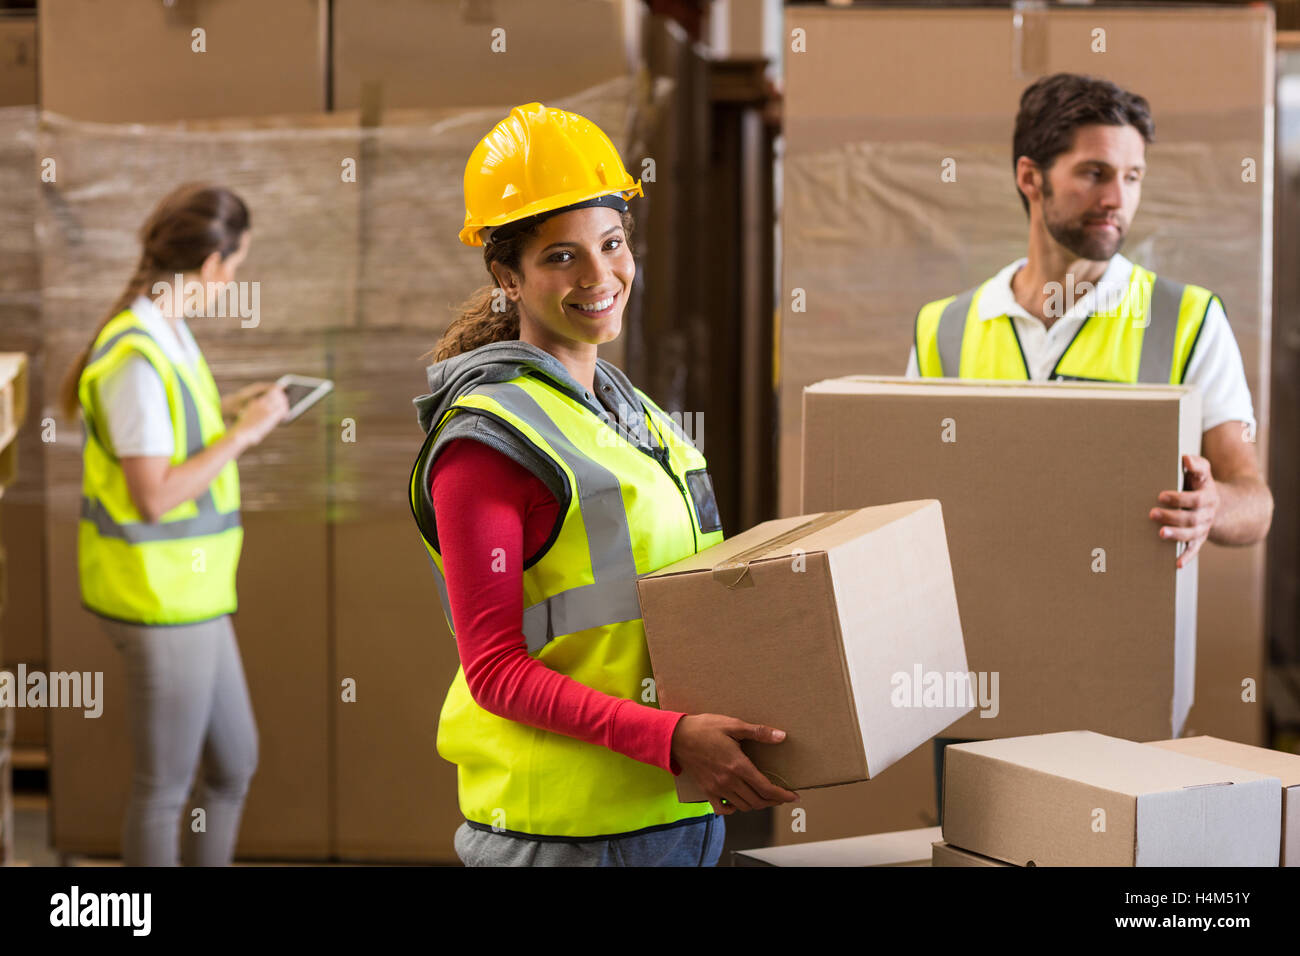 Portrait of warehouse worker carrying a cardboard box Stock Photo